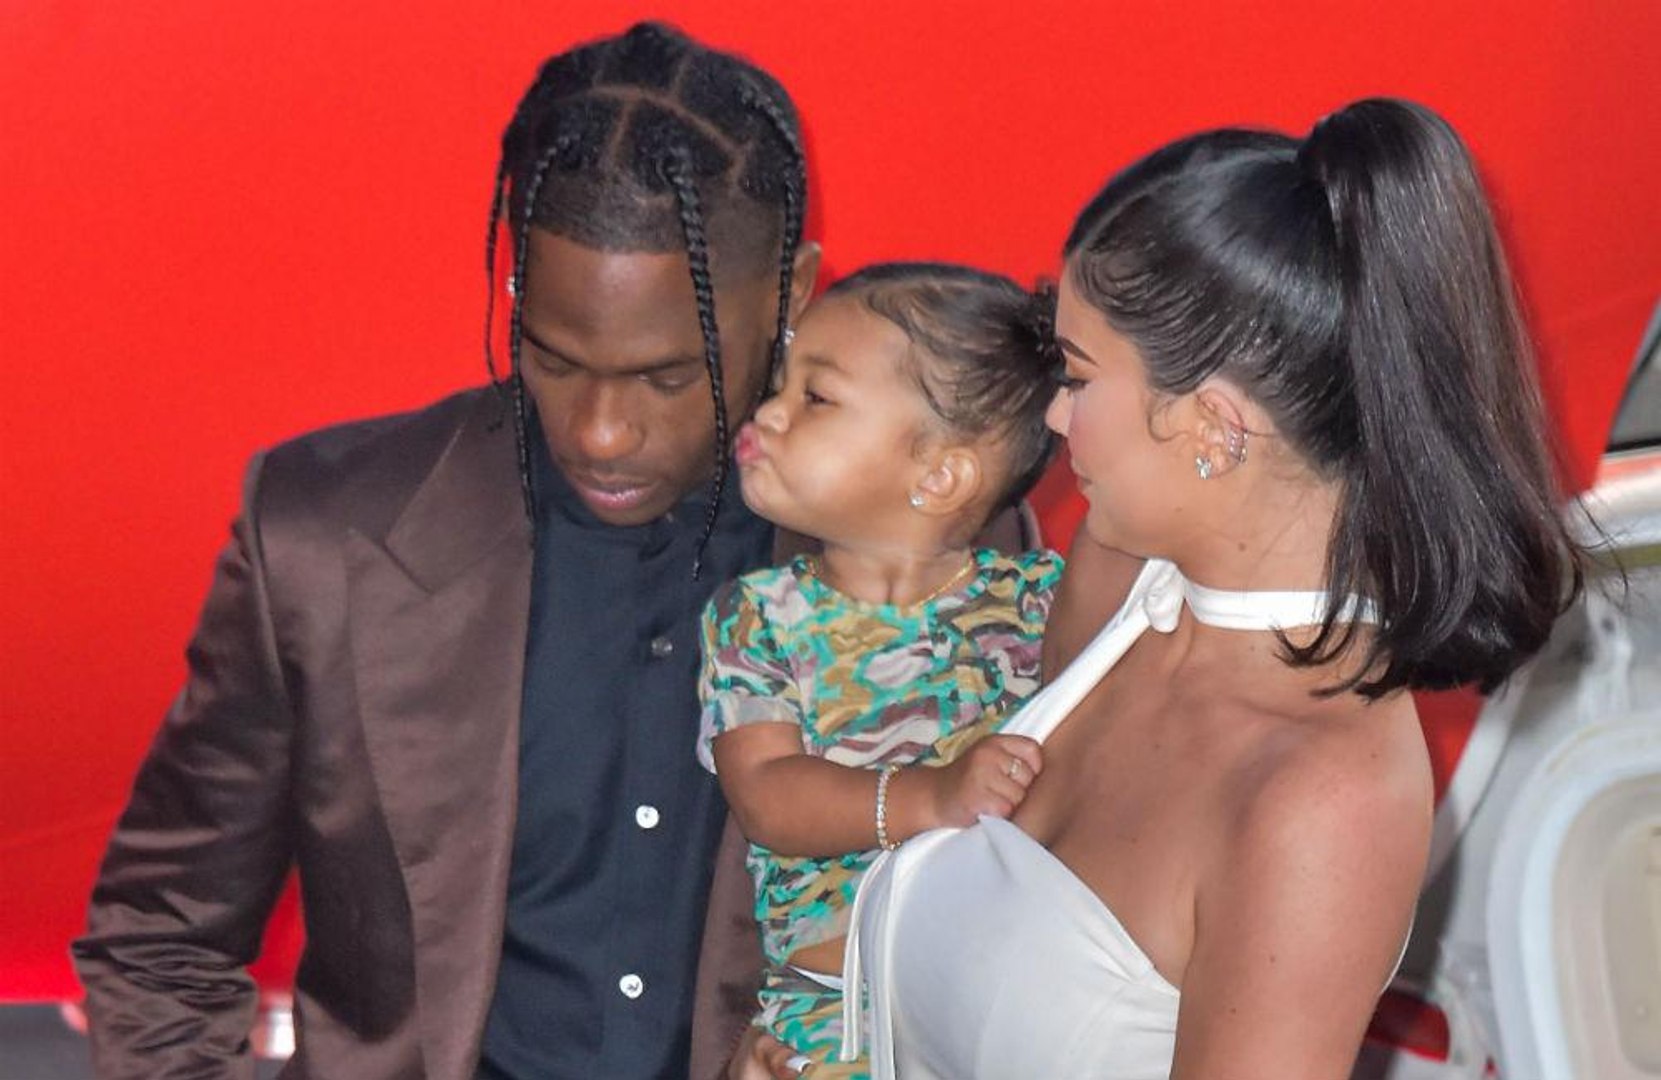 Kylie Jenner and Travis Scott co-parenting at Christmas